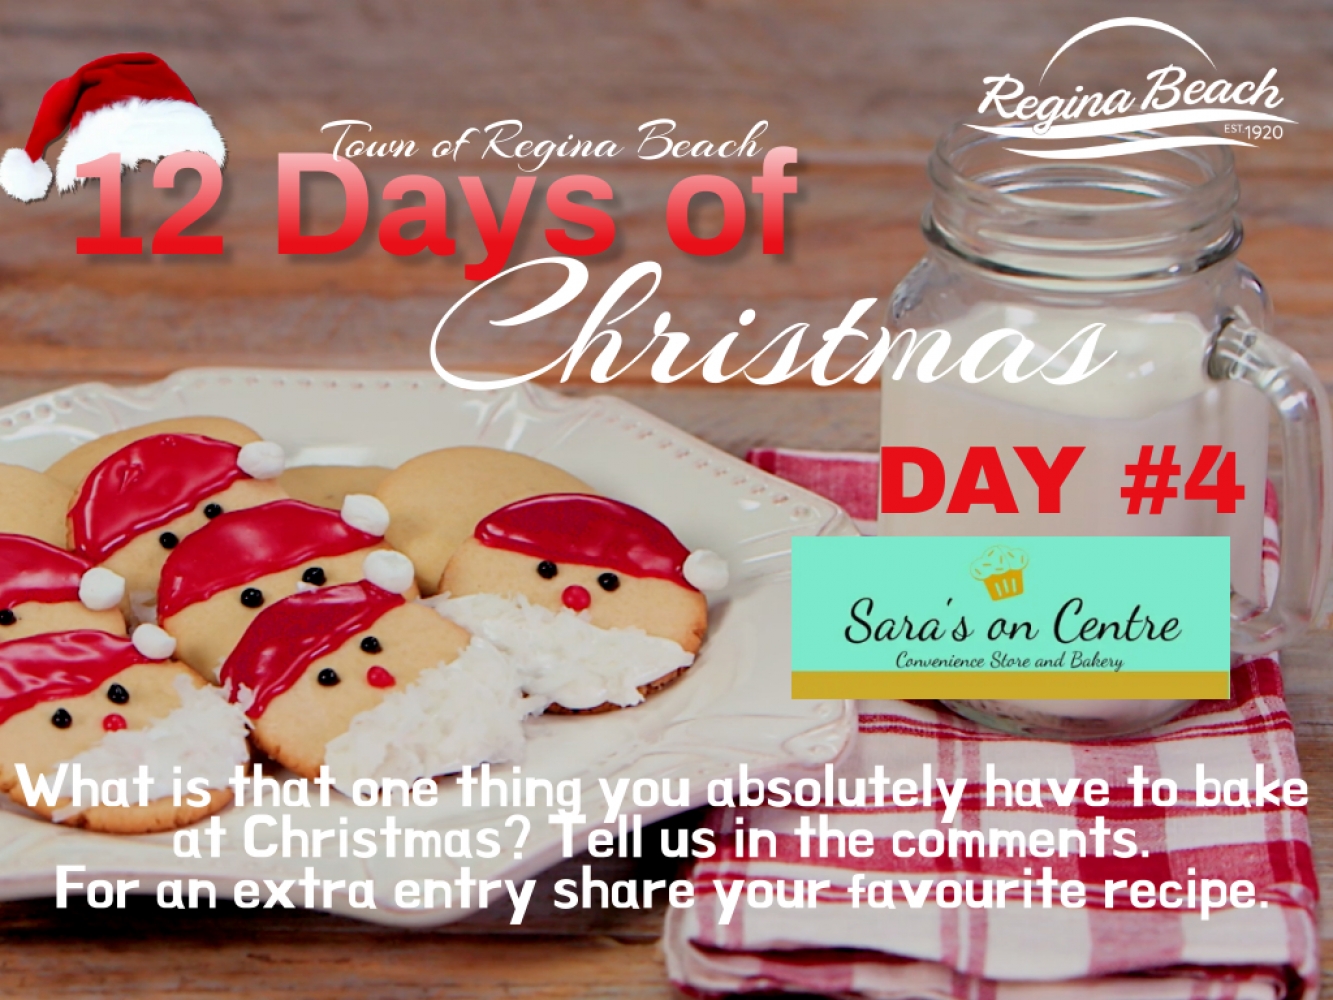 Day #4 of Our 12 Days Of Christmas